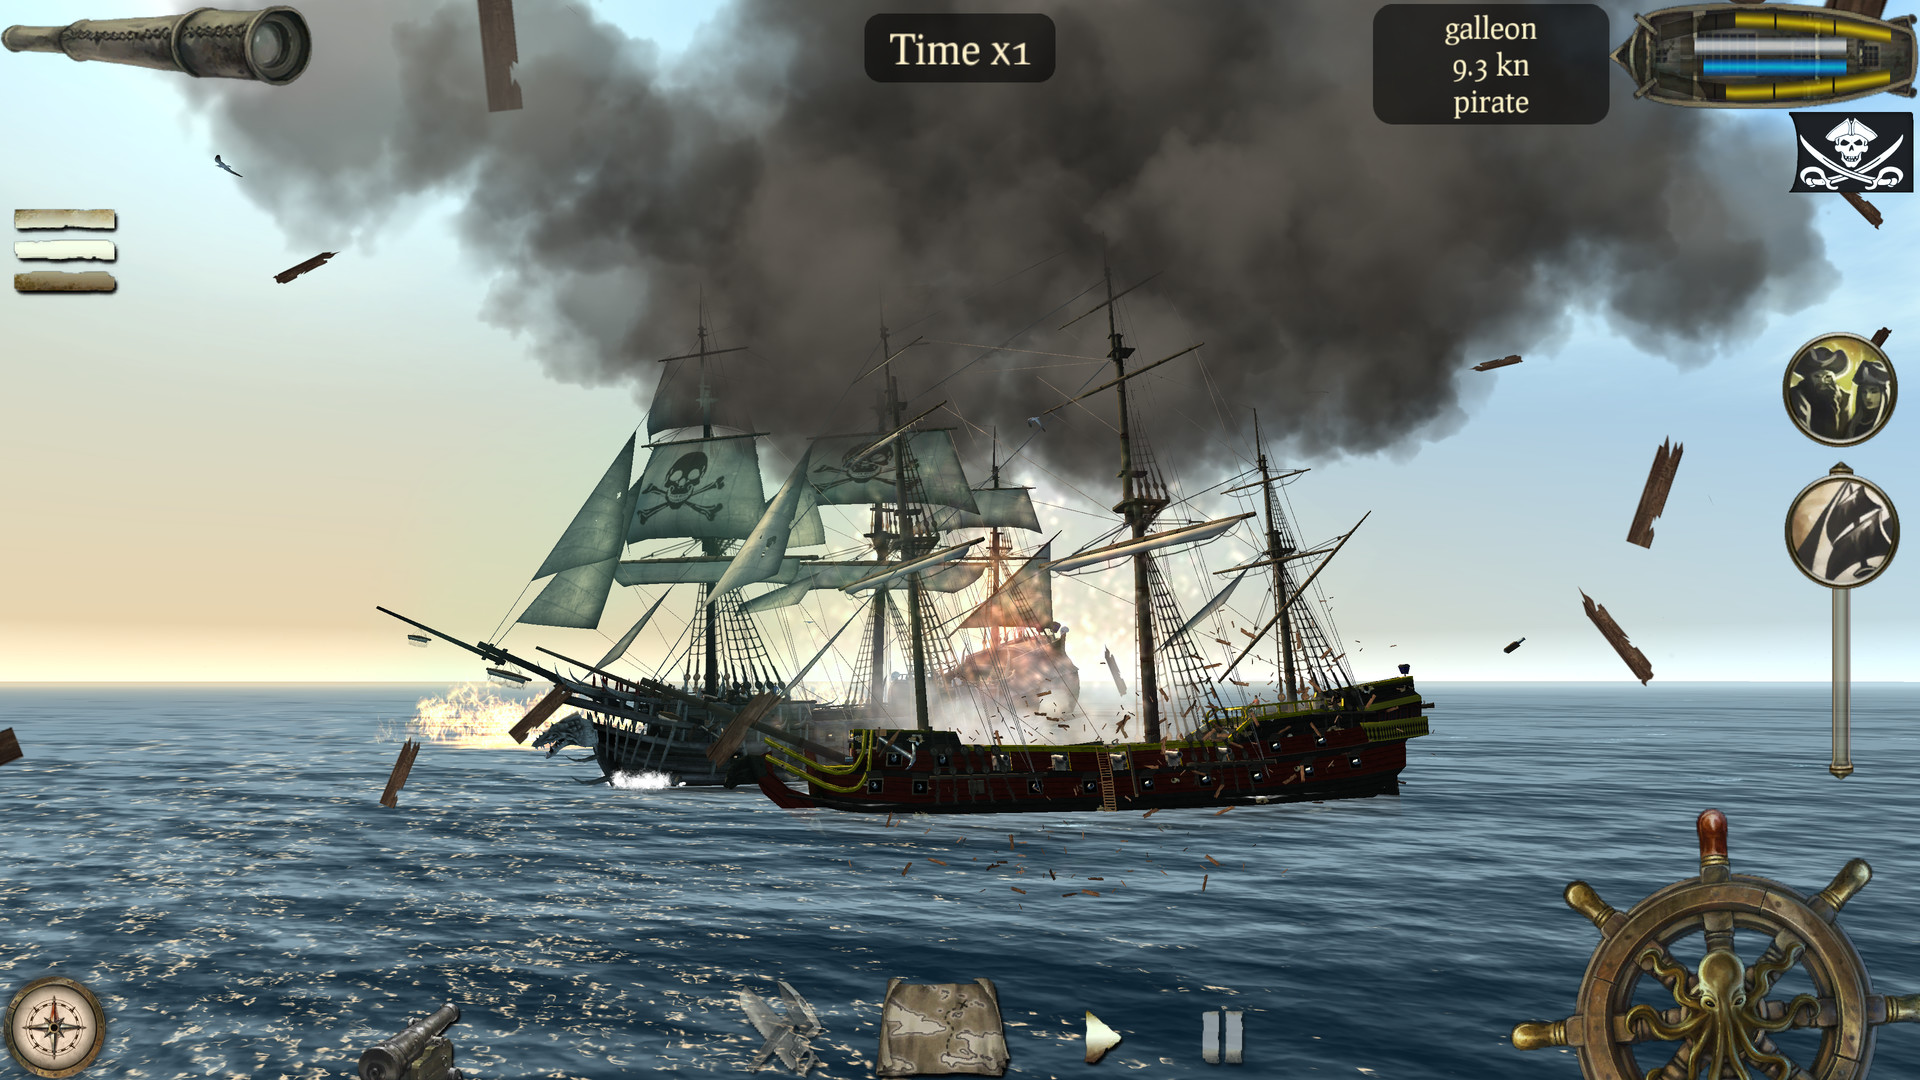 the pirate plague of the dead app how to read treasure maps